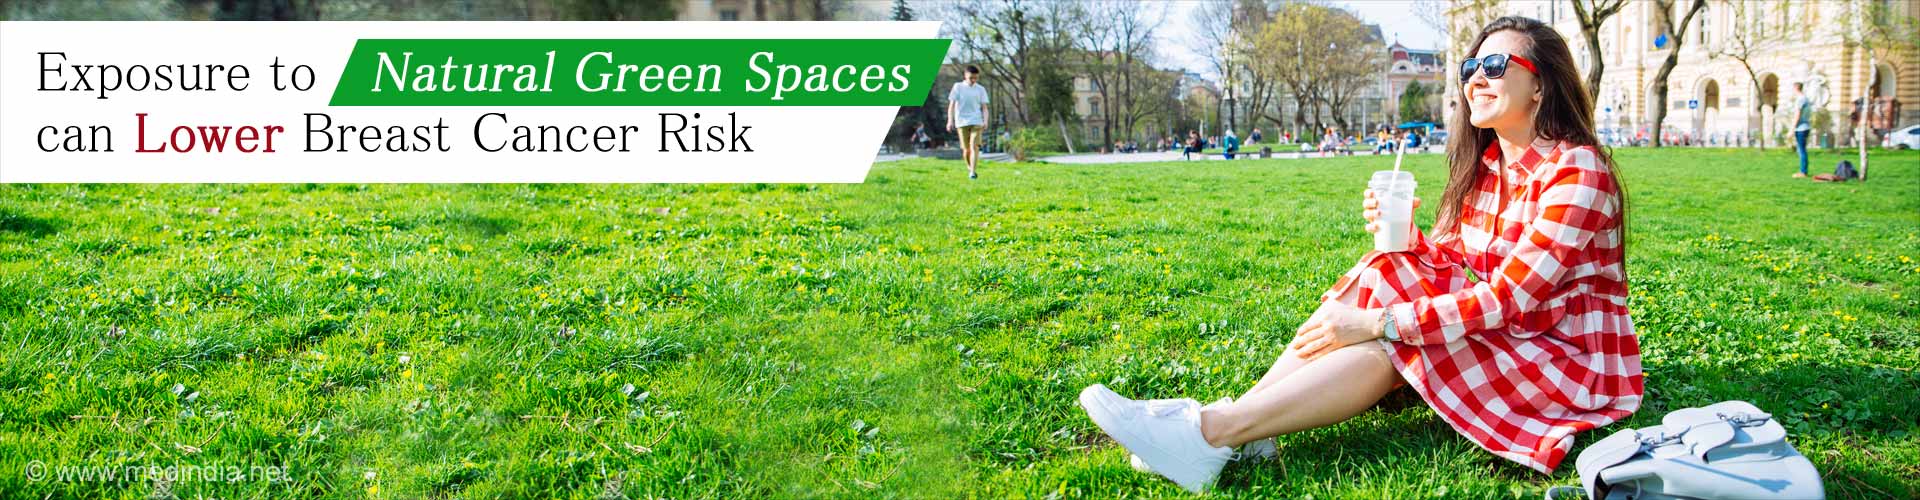 Exposure to natural green spaces can lower breast cancer risk.
